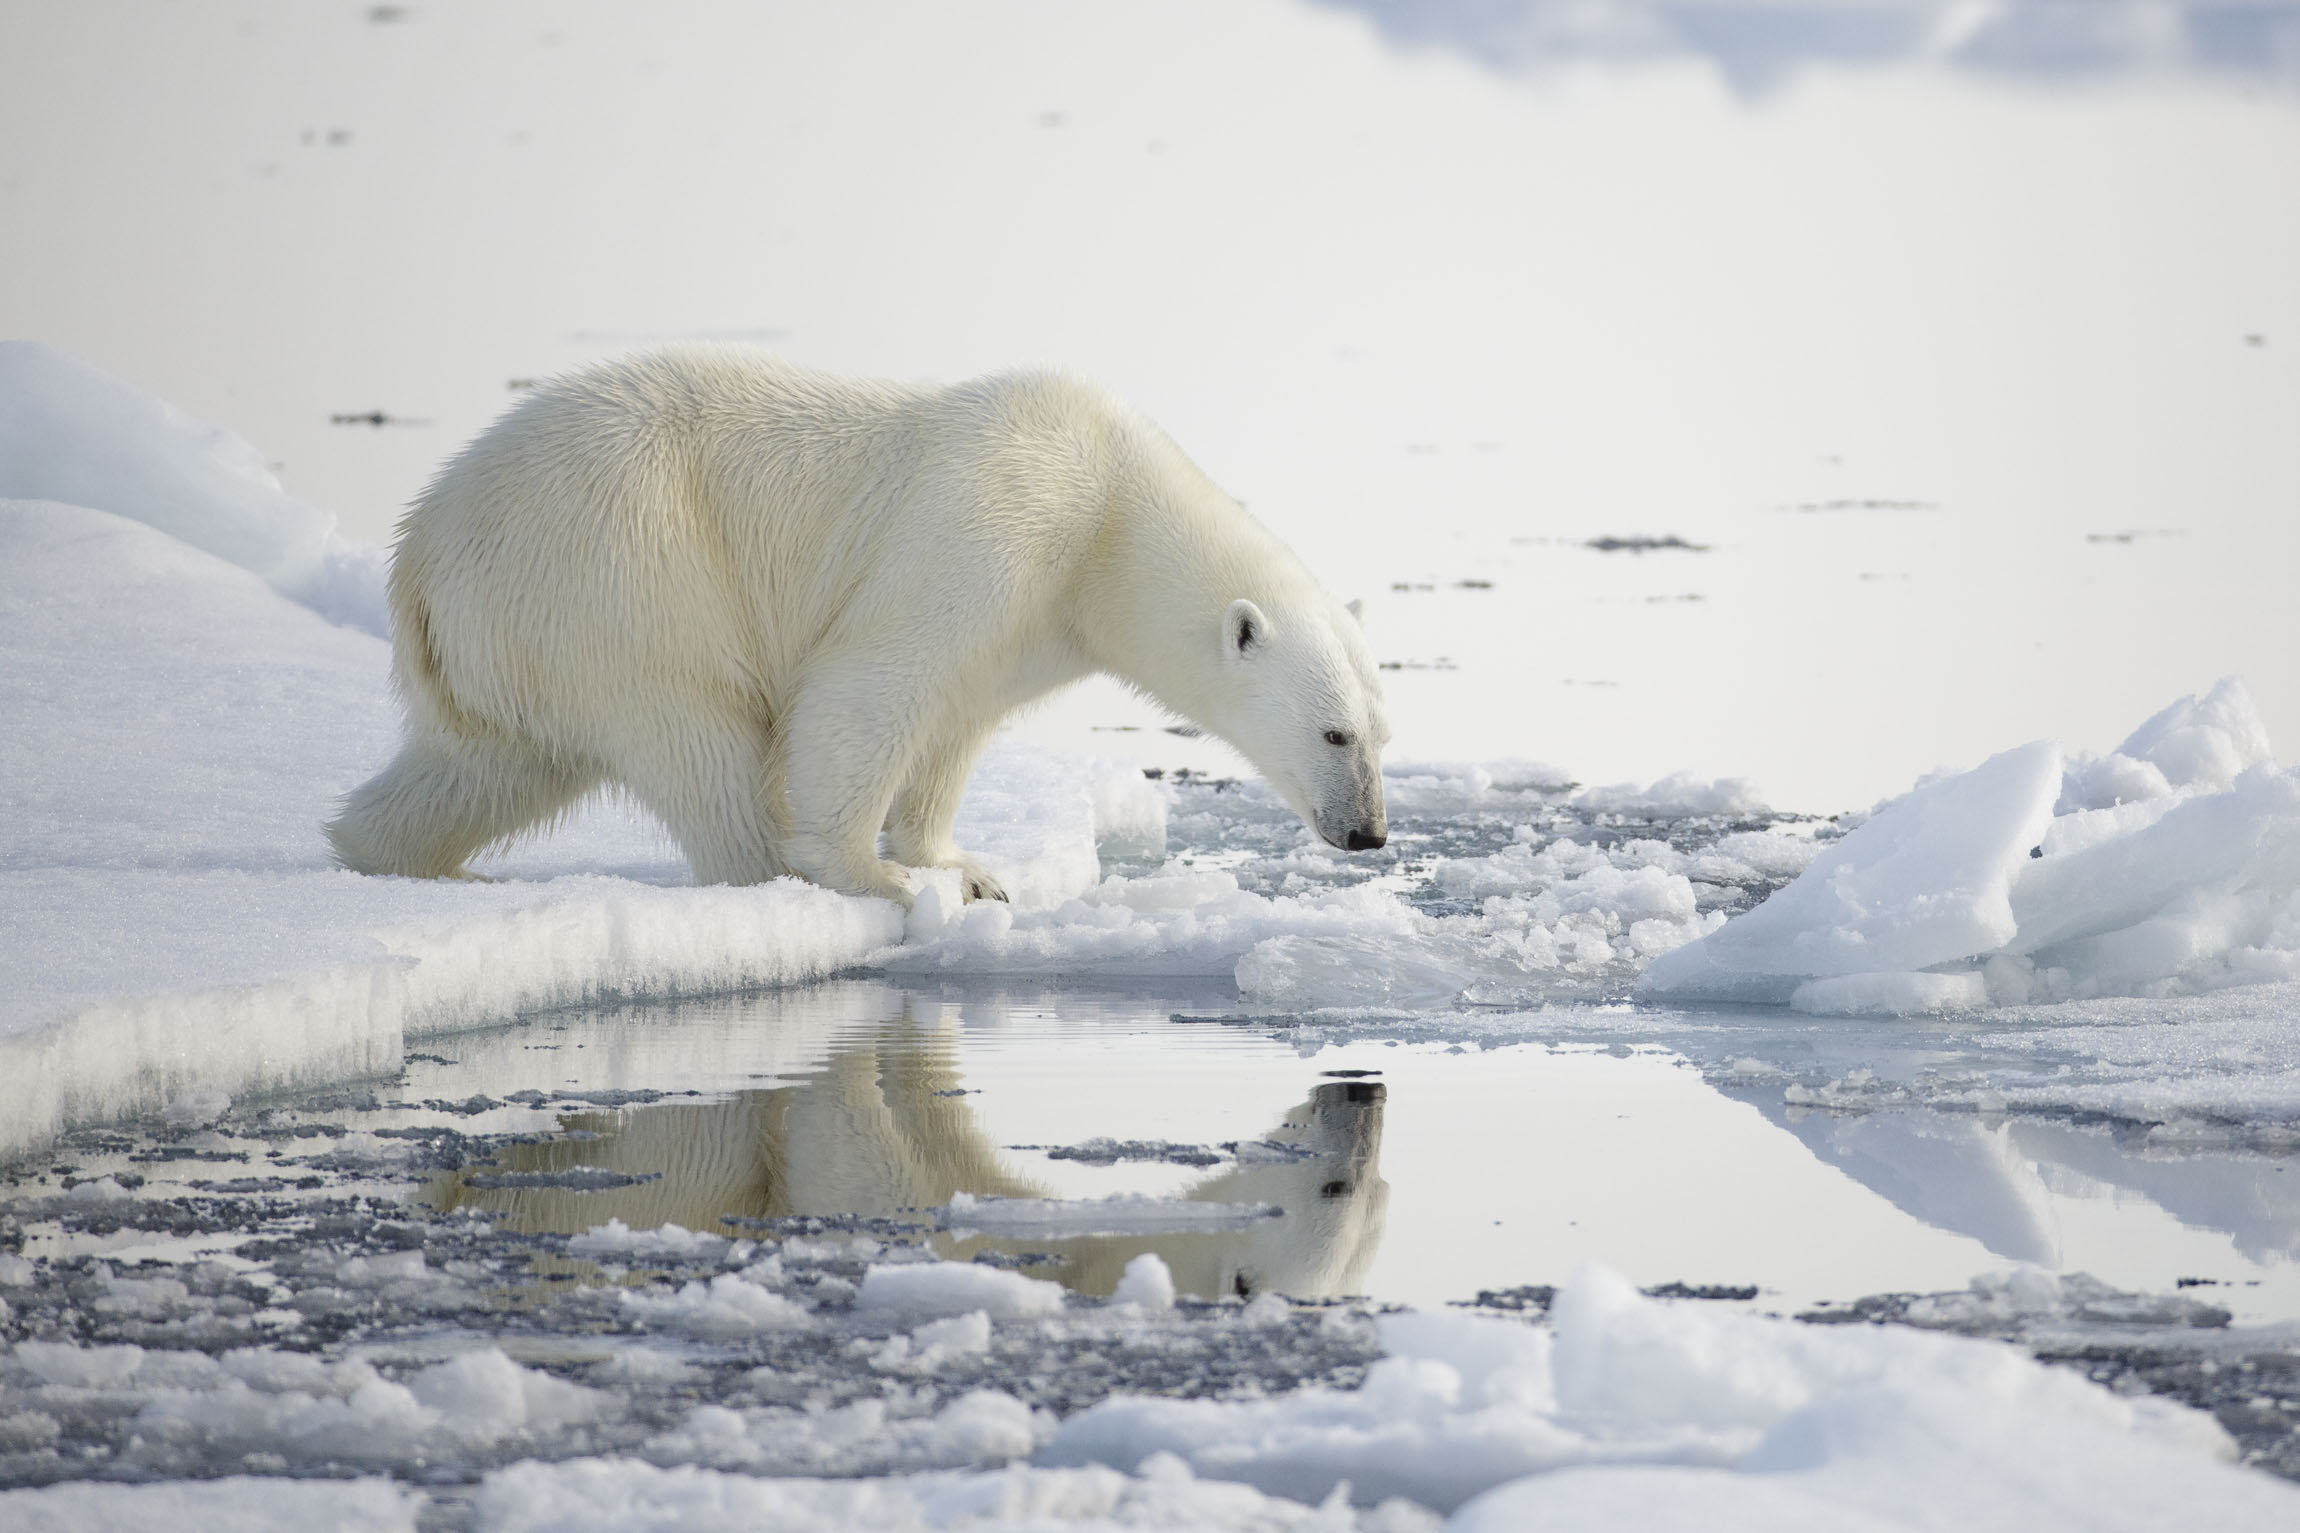 A polar bear sees its reflection in the water